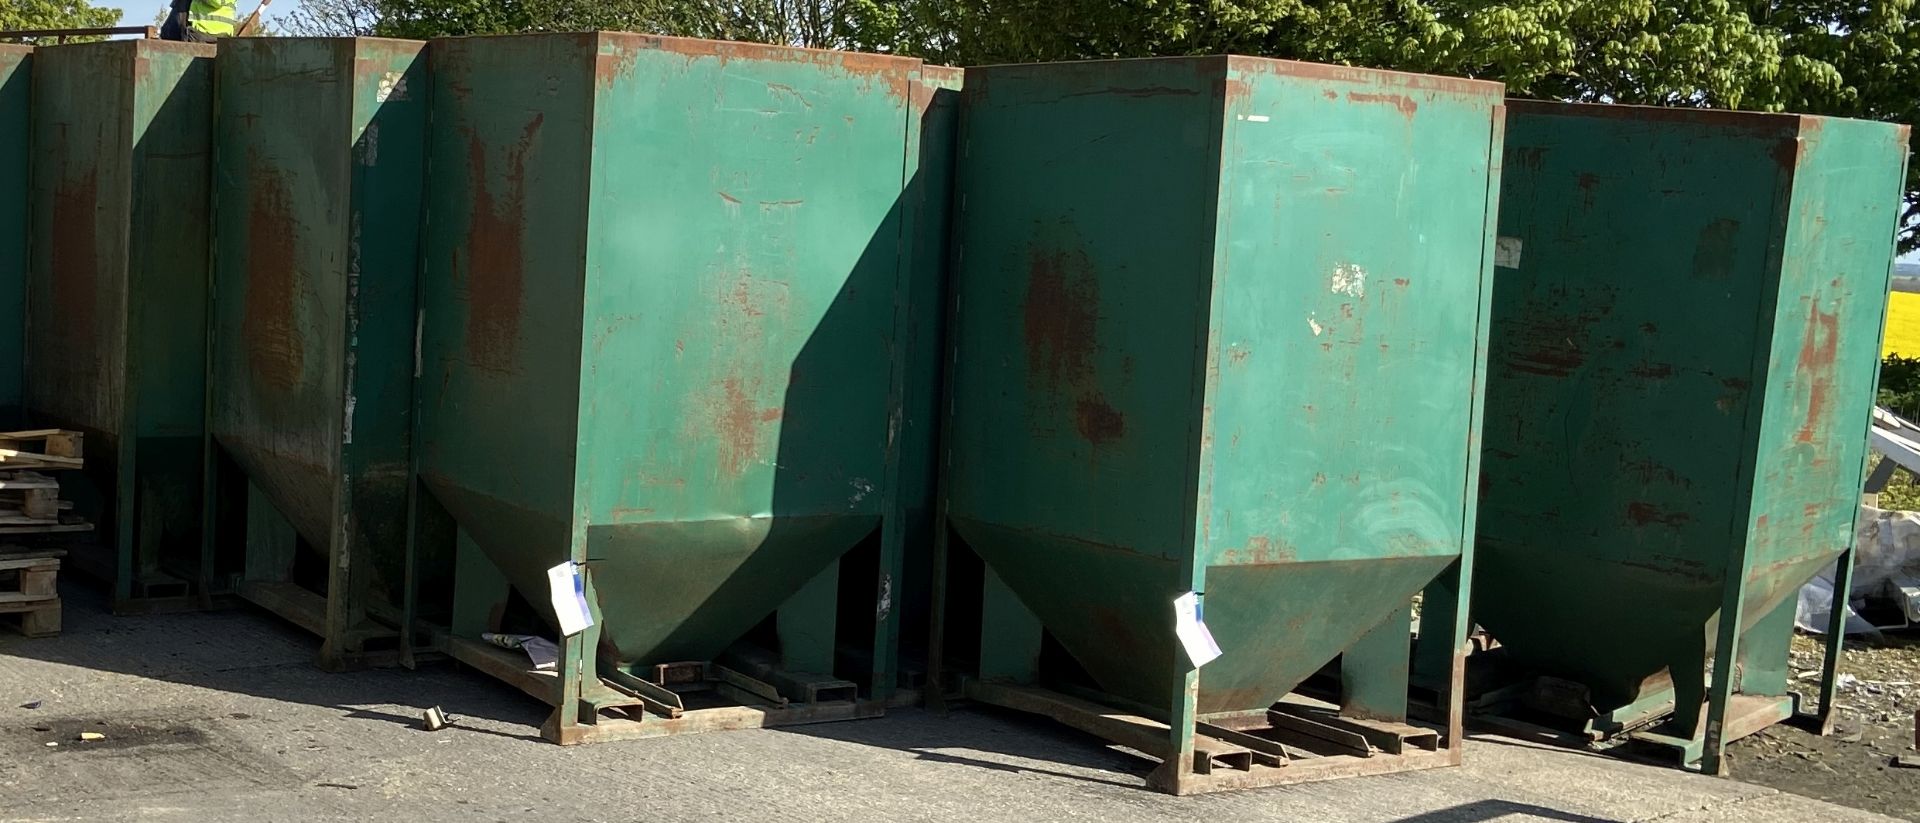 FIVE HOPPER BOTTOMED TOTE BINS,lot located Driby Top, Alford; free loading – yes Please read the - Image 2 of 2